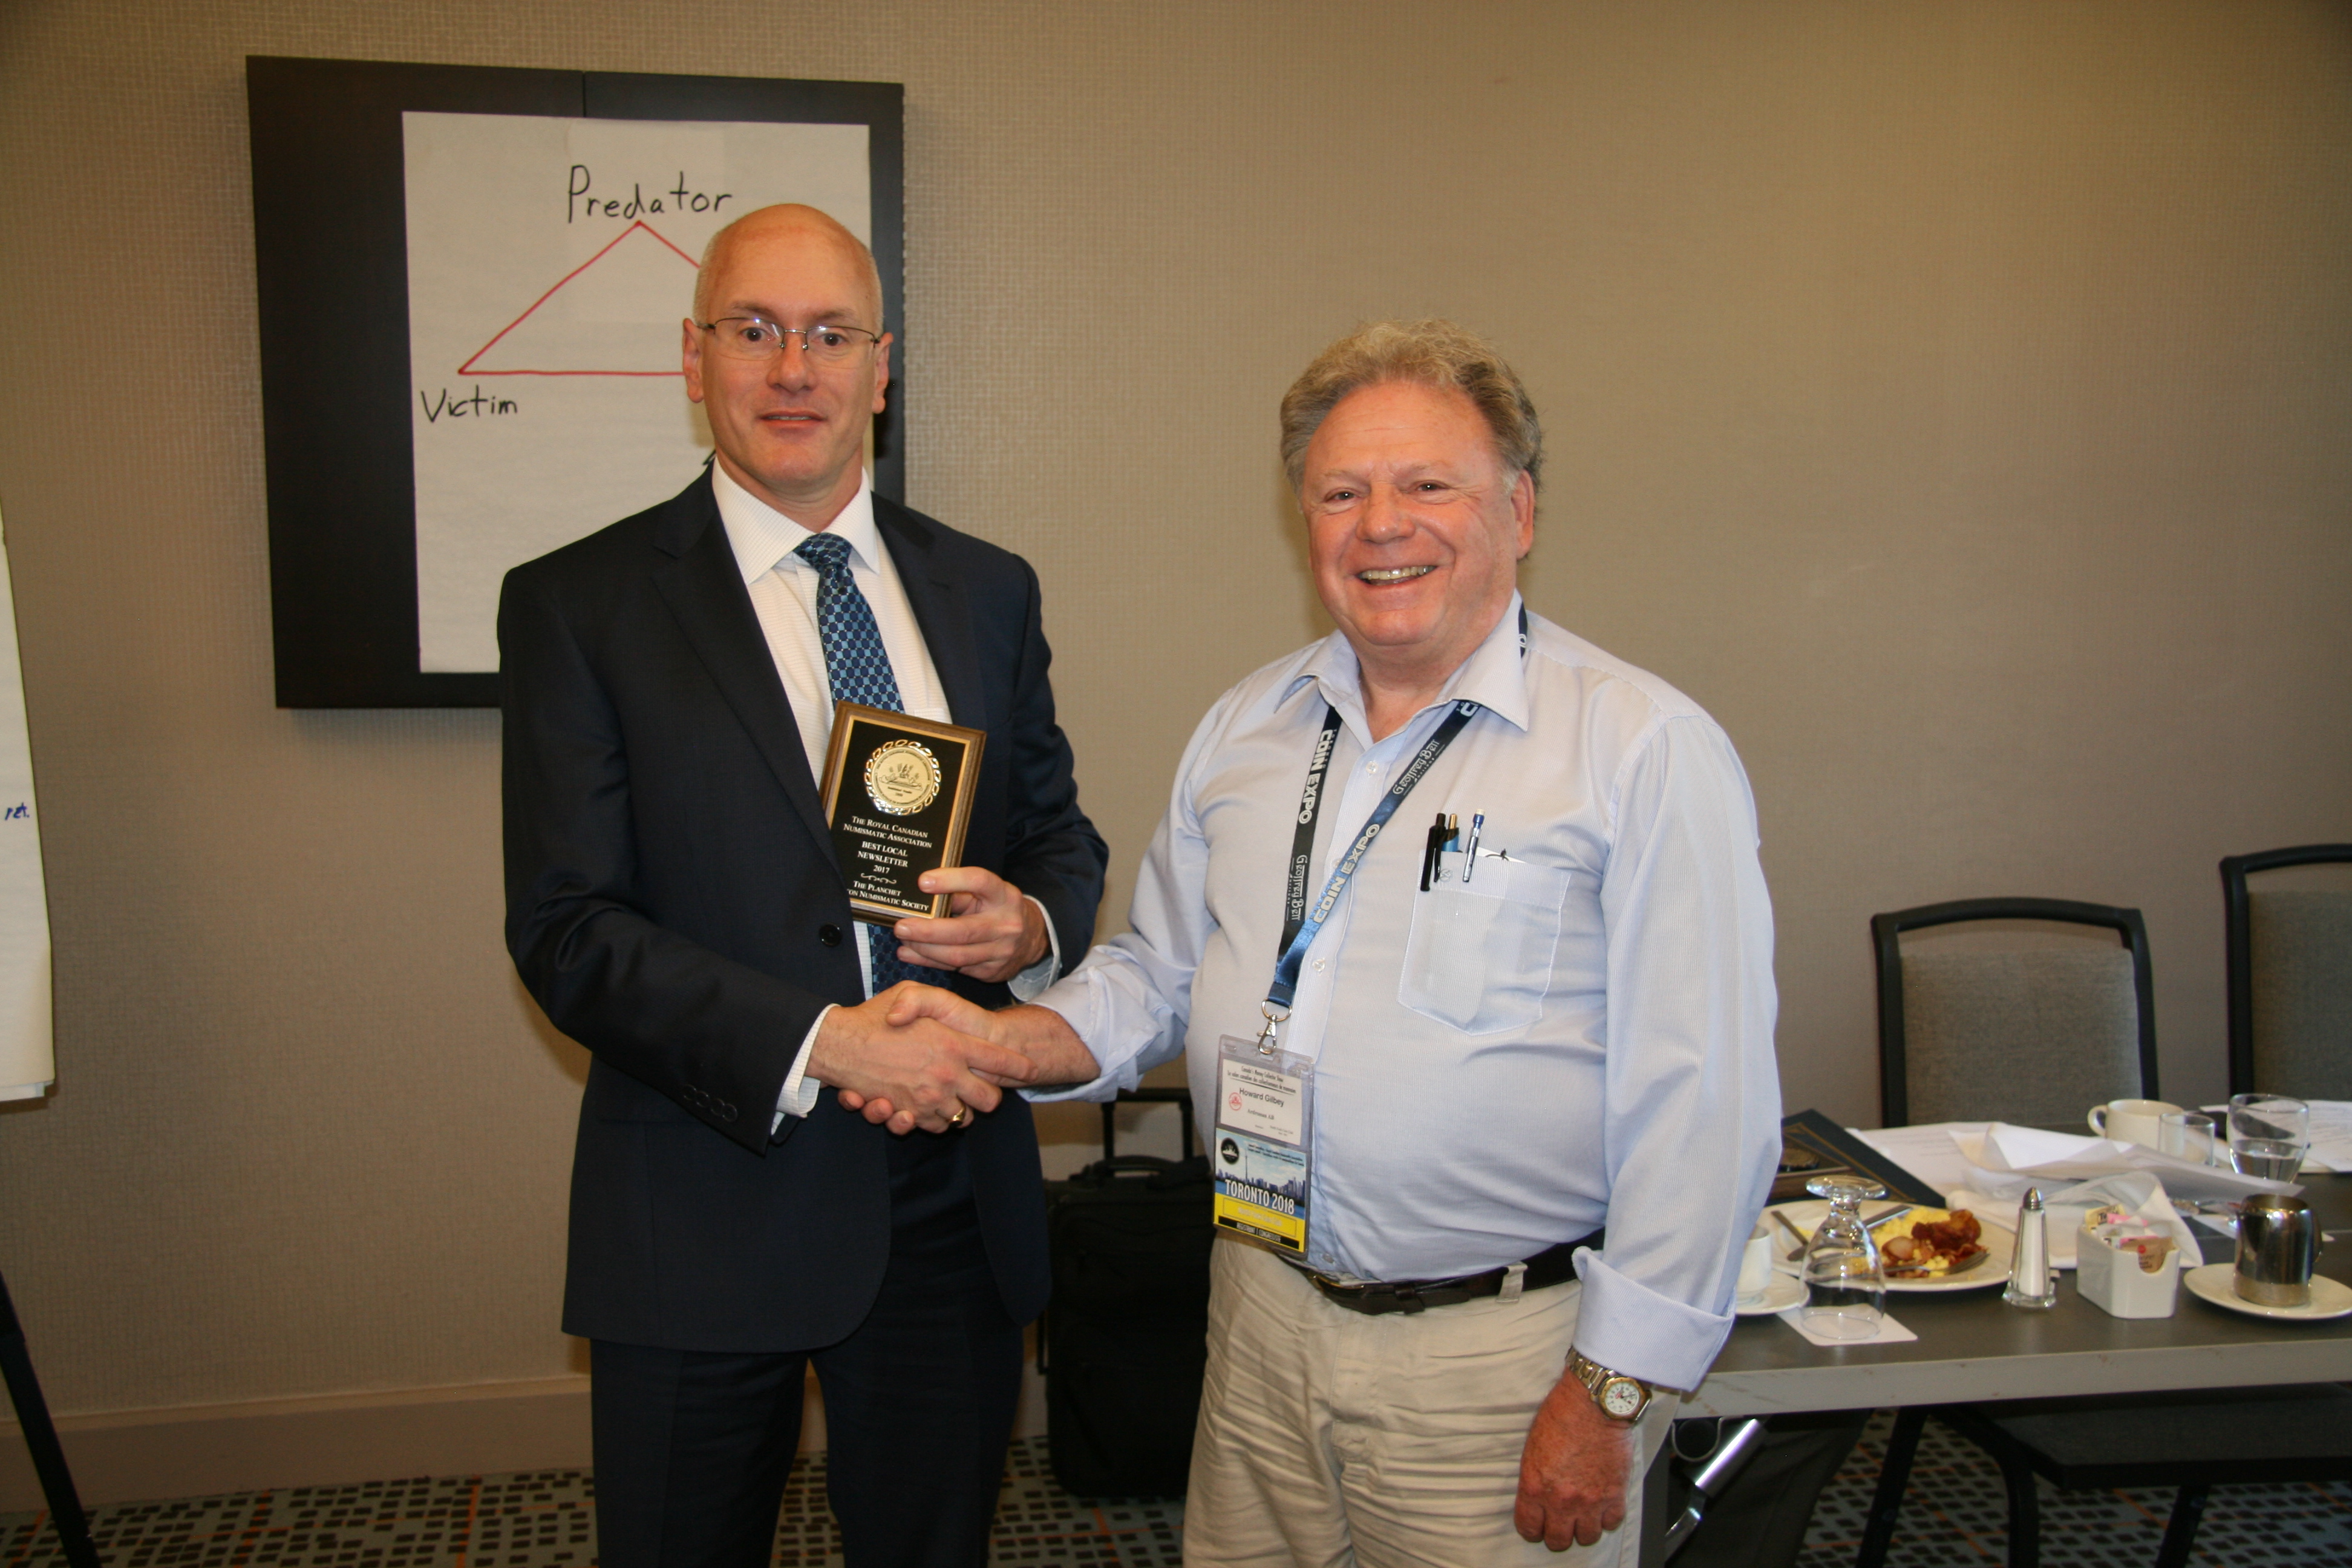 <p><strong>Edmonton Numismatic Society</strong> received the Best Local Club Newsletter Award. Howard Gilbey (right) accepting the award from <strong>Brett Irick</strong> (left).<br> <small>Dan Gosling photo</small></p>